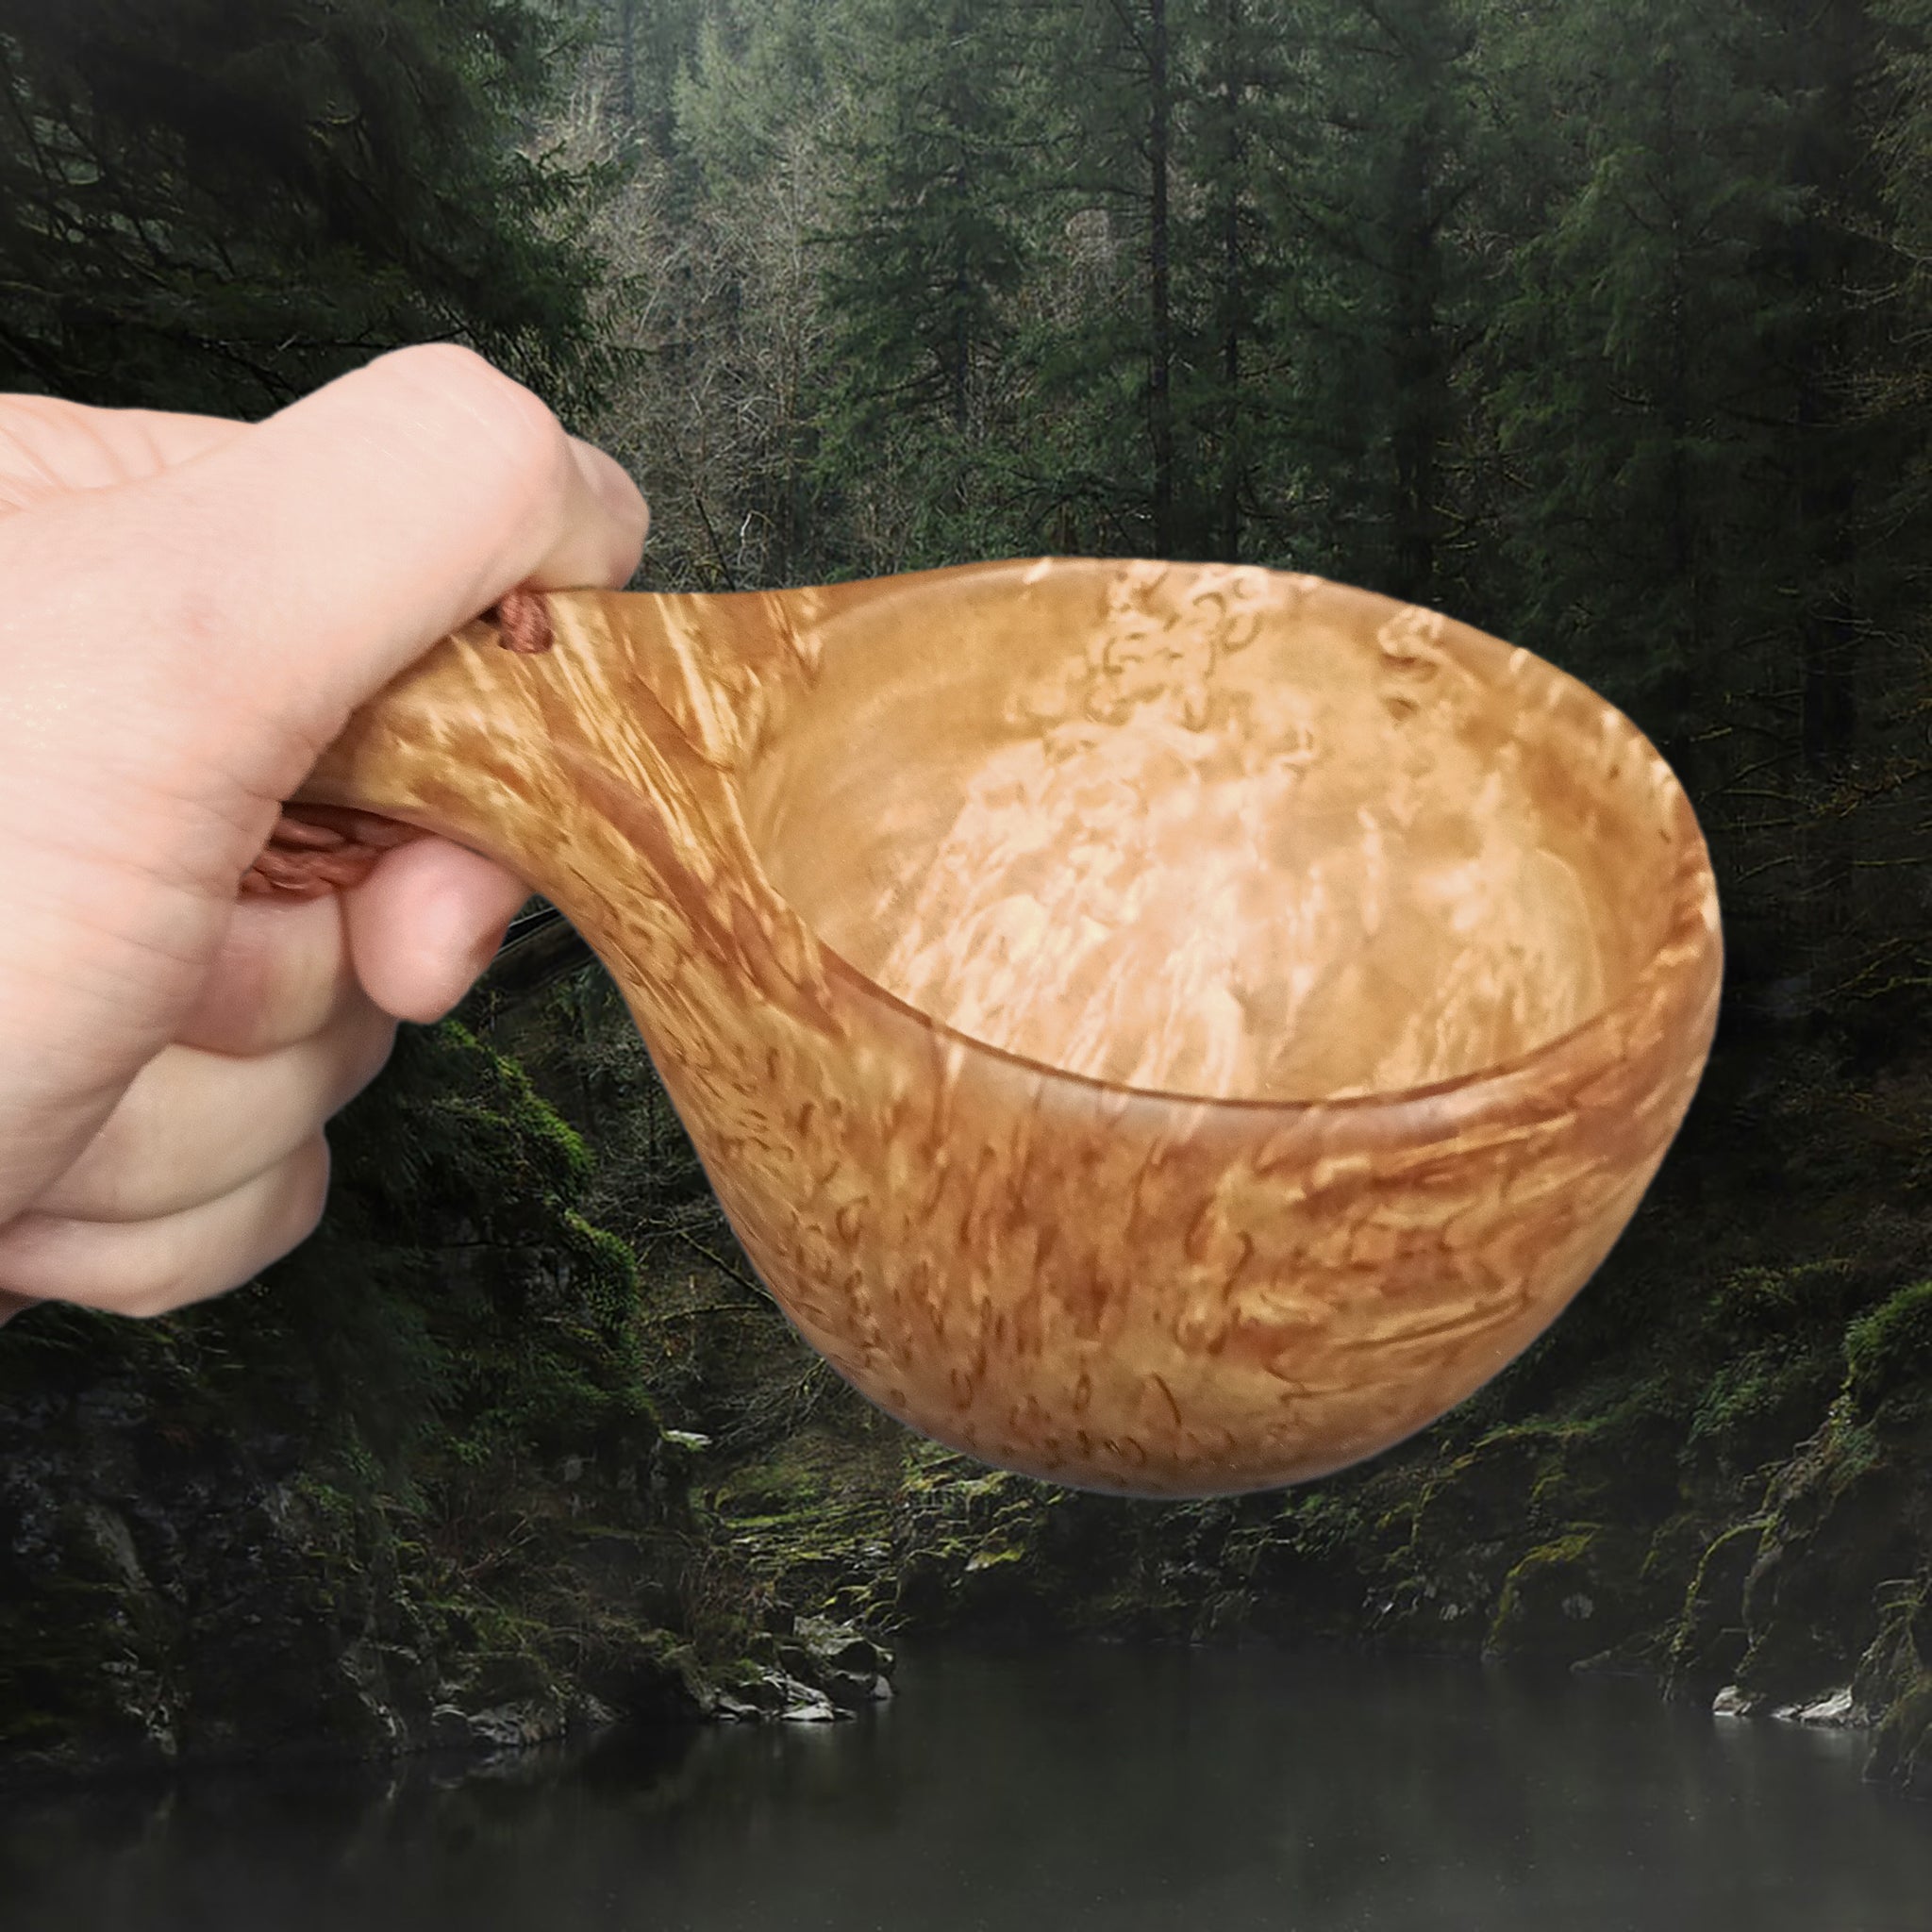 Handmade Saami Kuksa Cup Carved From a Birch Wood Curl in Hand - Angle View